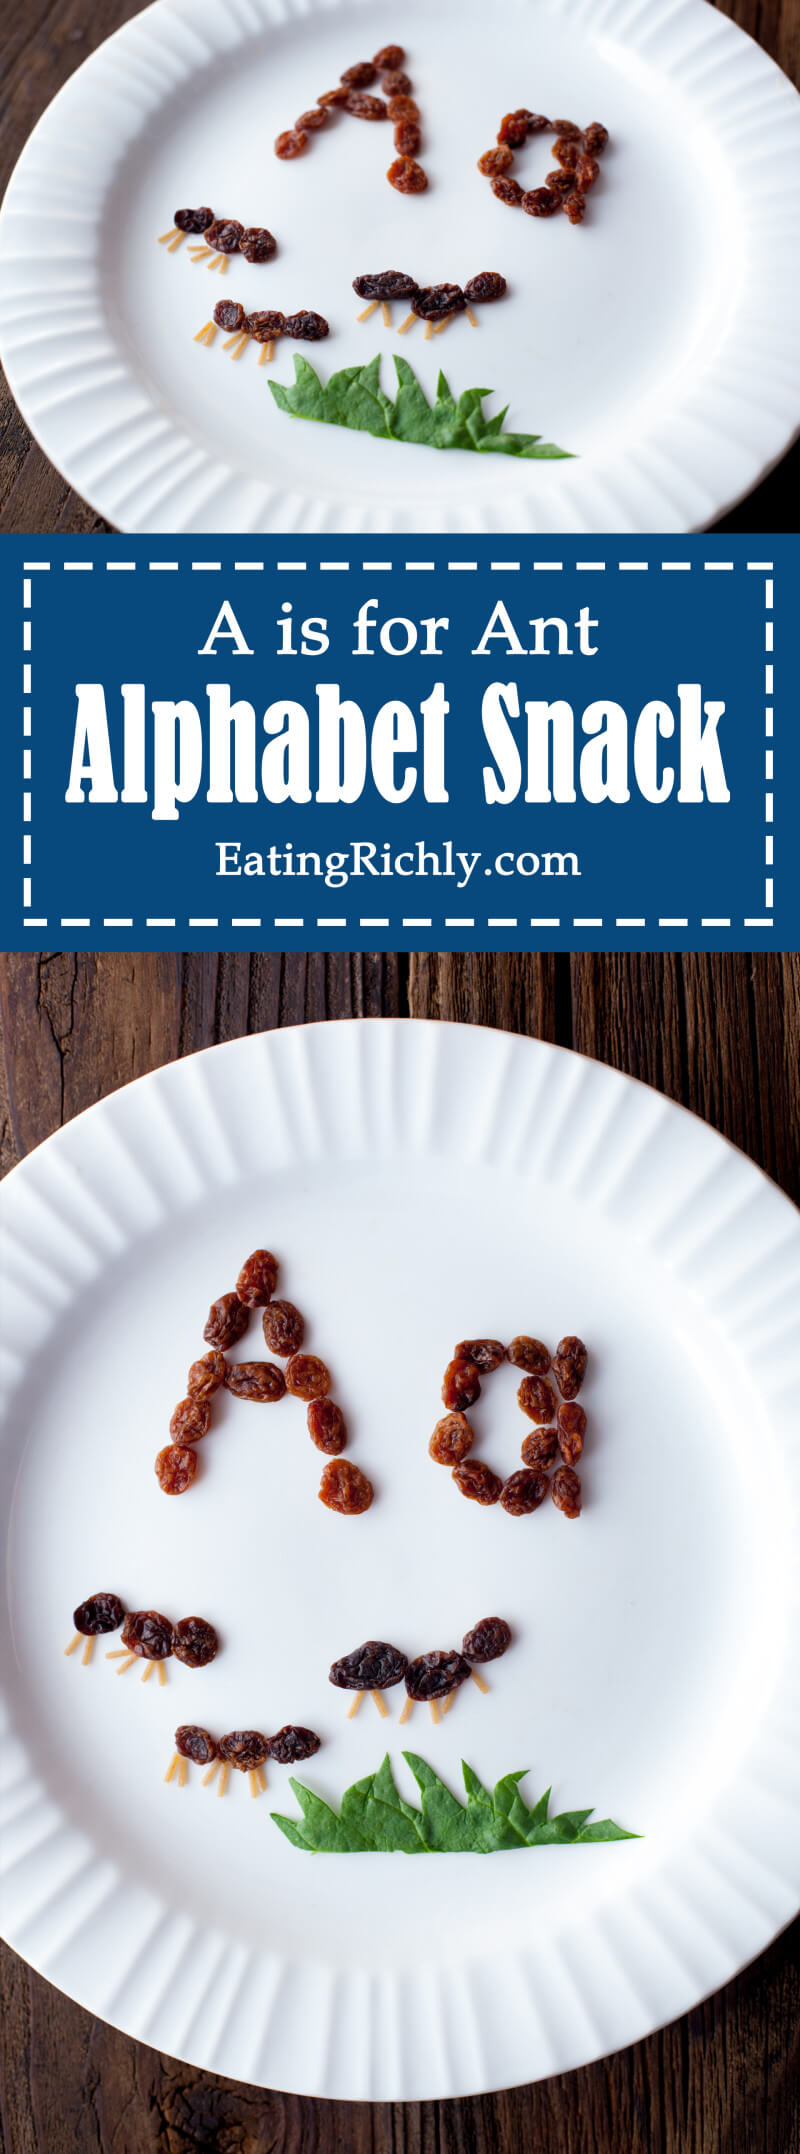 Easy alphabet kids snacks create a fun edible learning experience and preschool reading introduction. These raisin ants teach kids that A is for Ant. From EatingRichly.com.